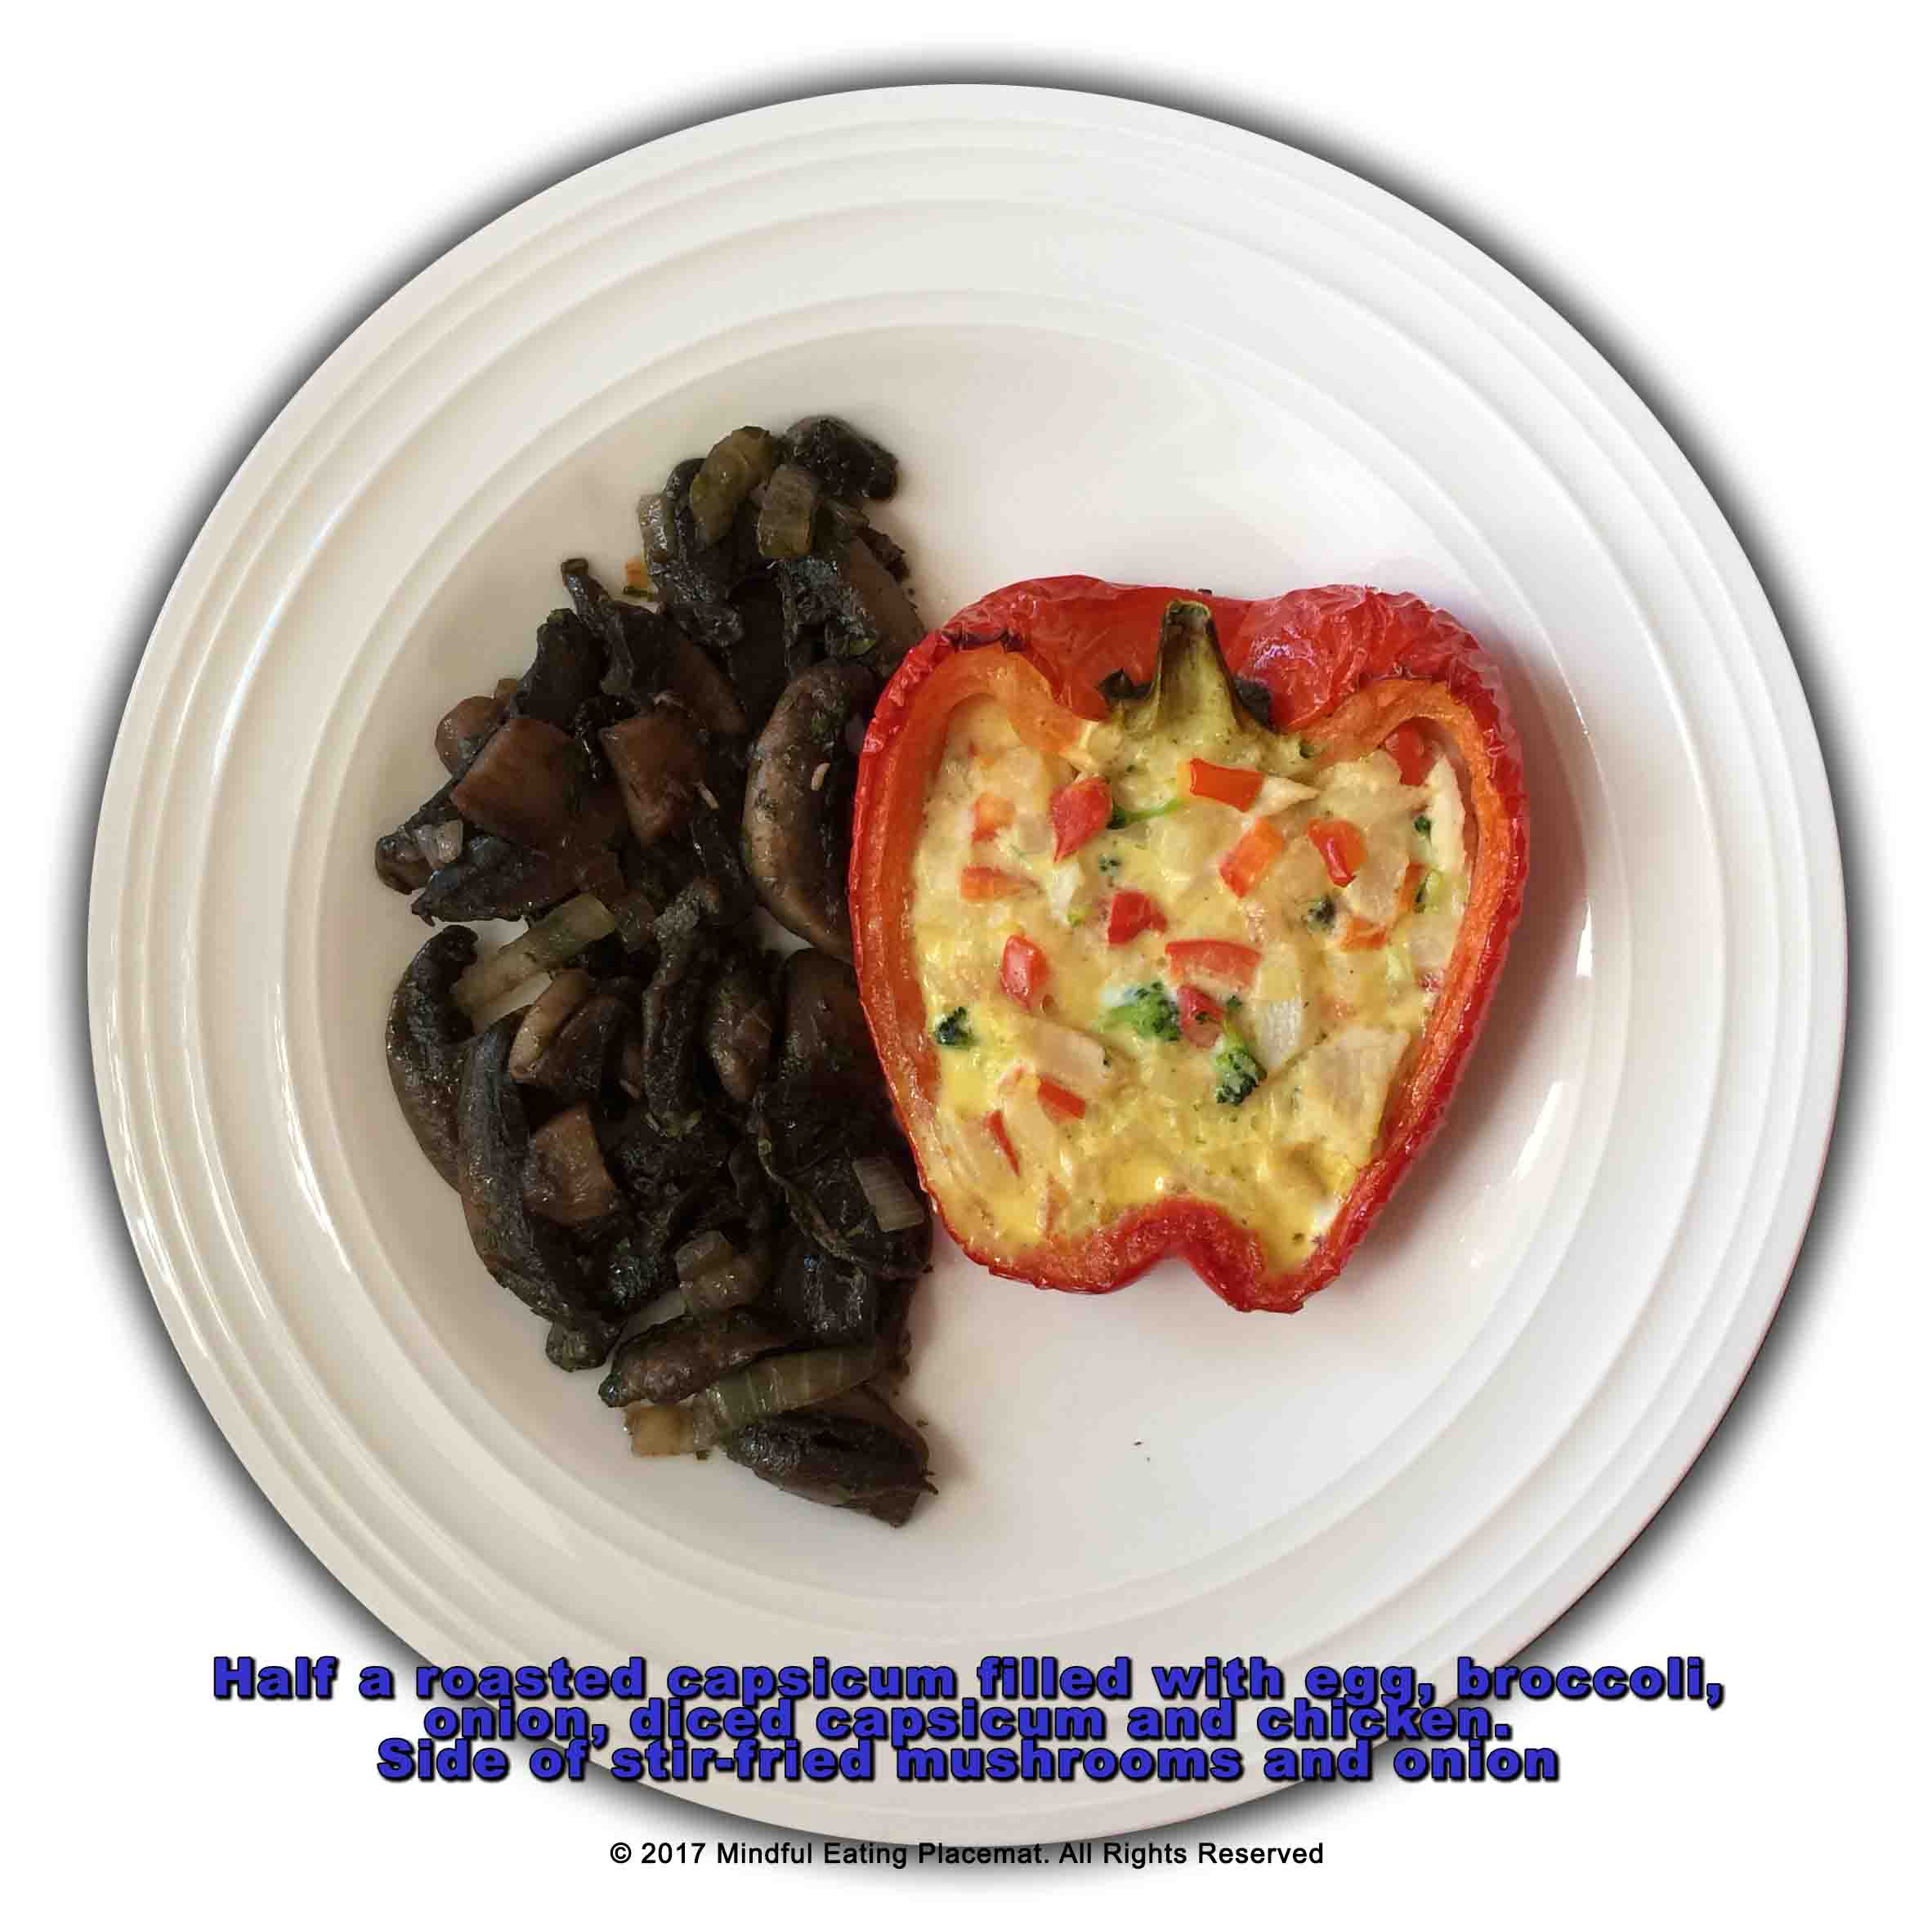 Roasted capsicum frittata with a side of mushrooms 